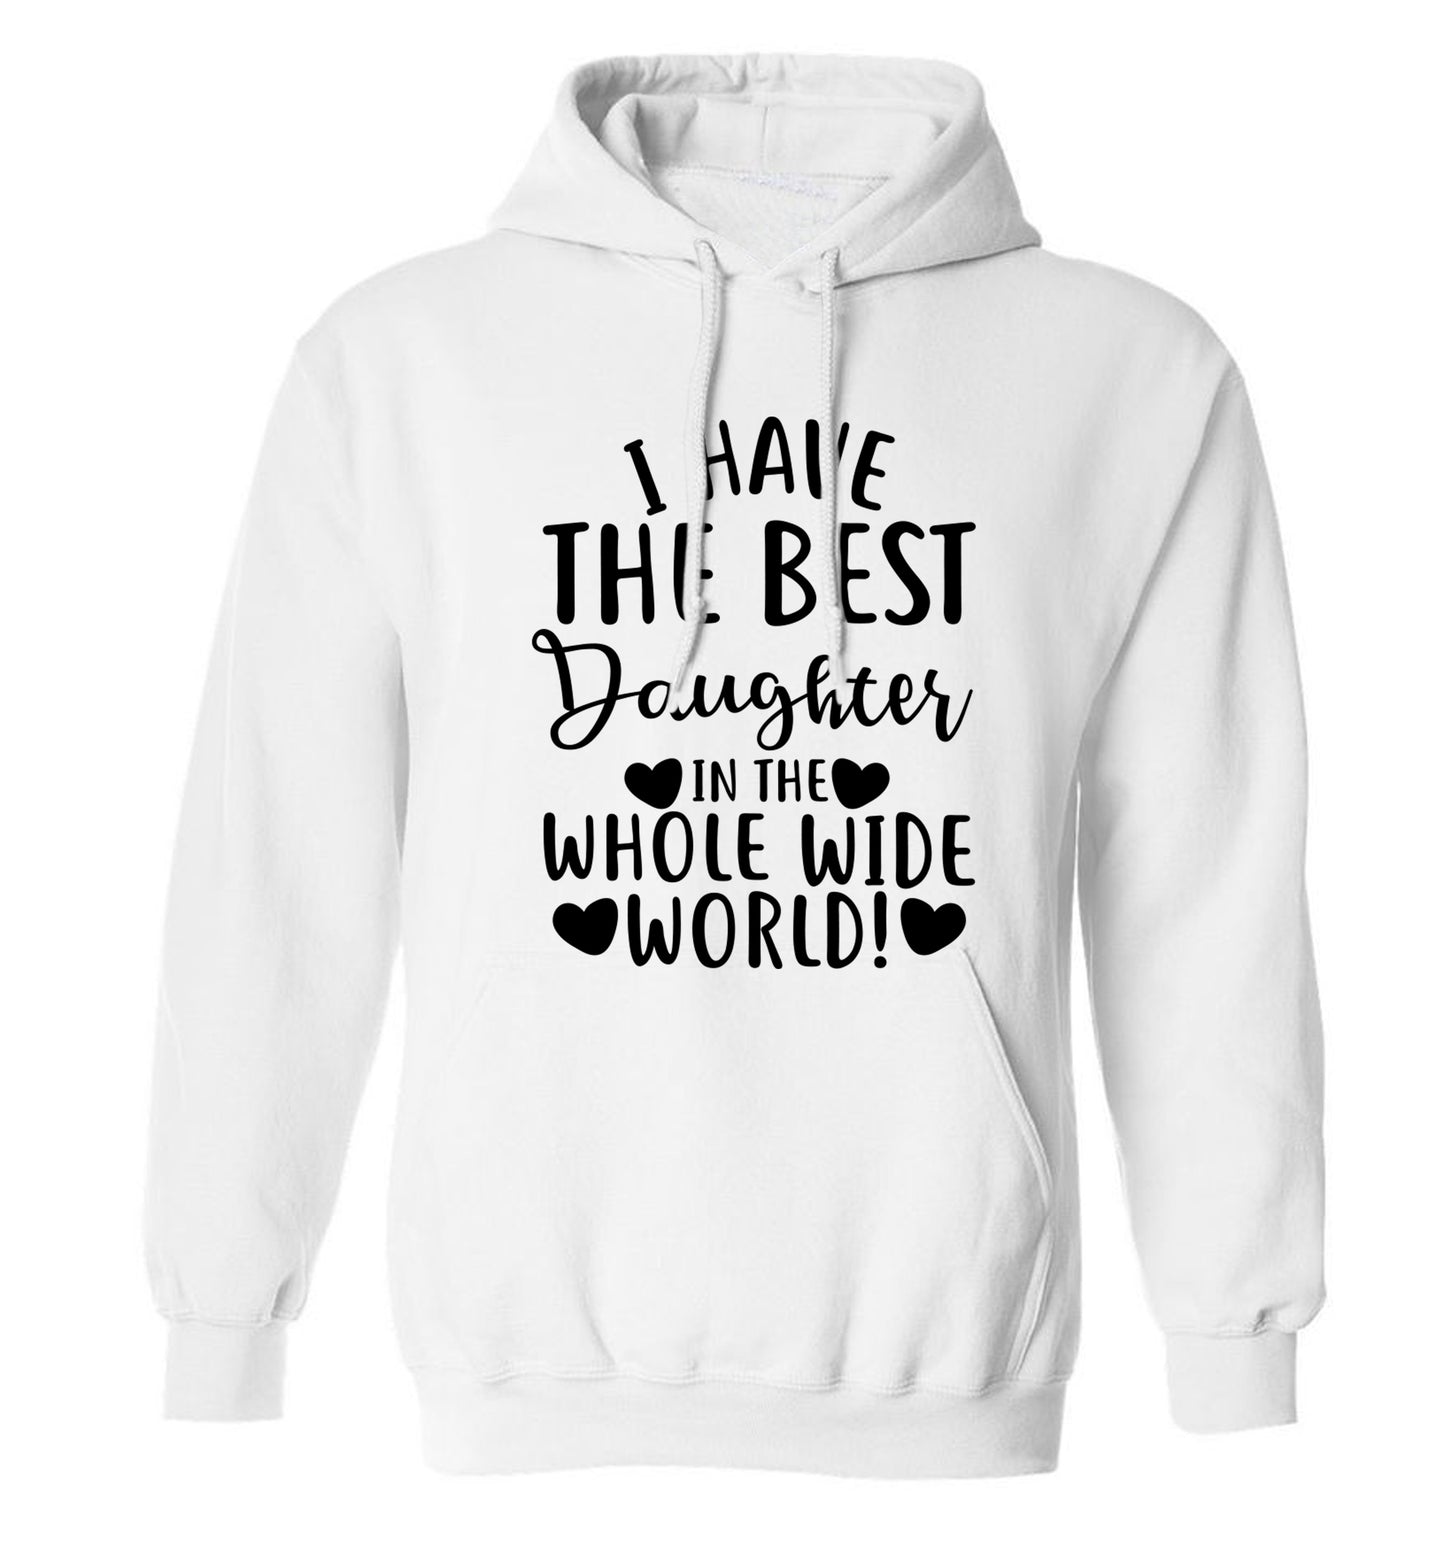 I have the best daughter in the whole wide world! adults unisex white hoodie 2XL